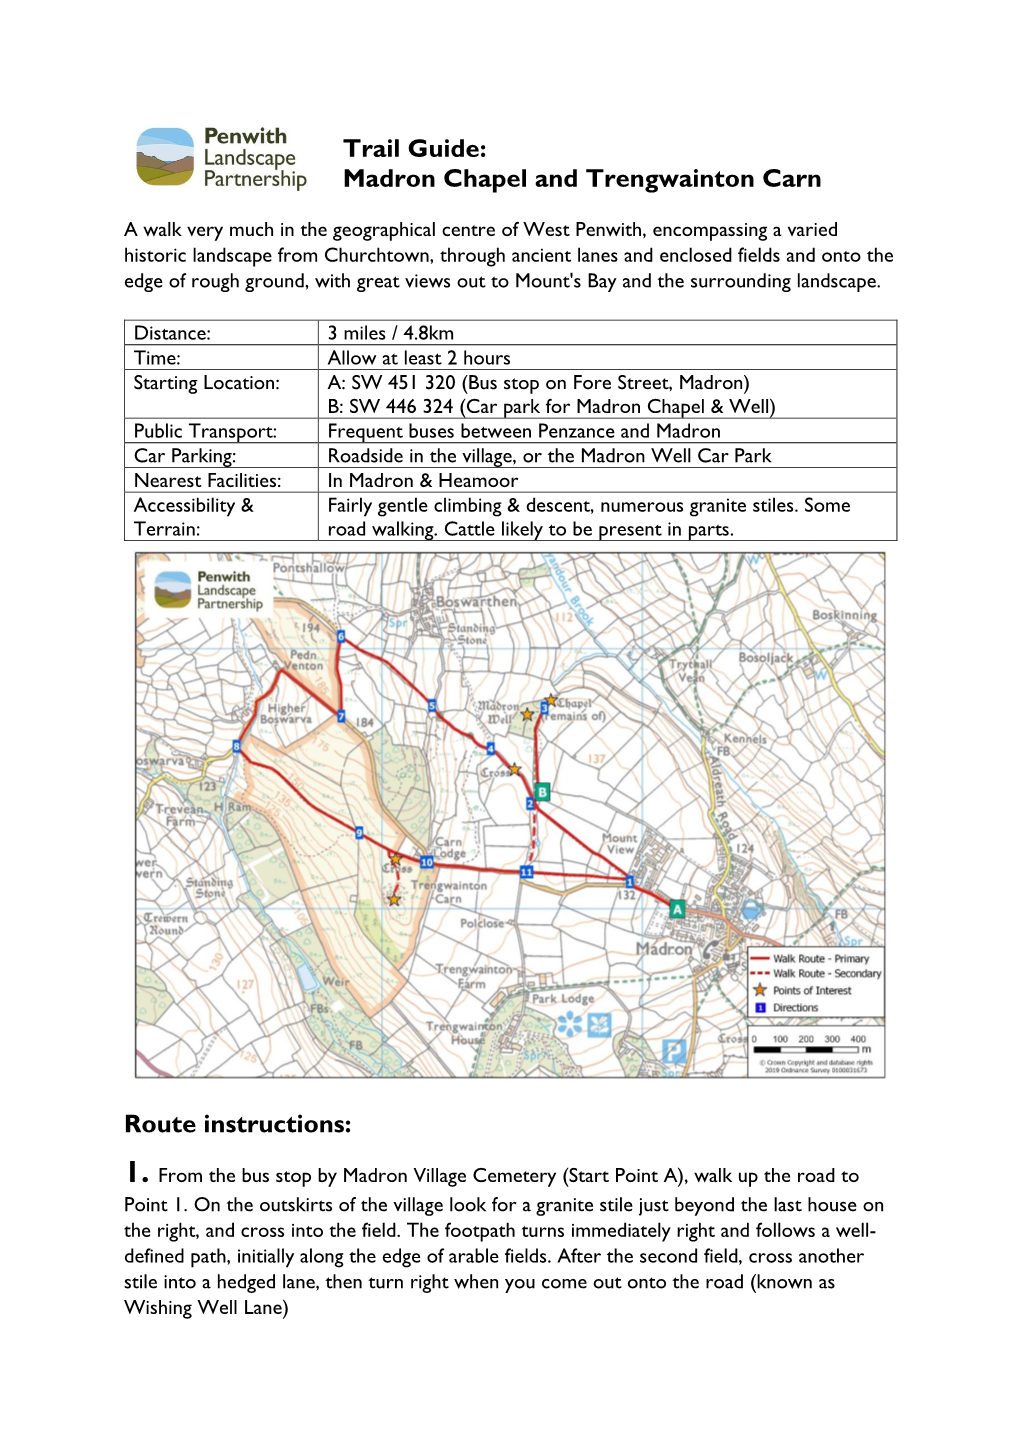 Madron Chapel and Trengwainton Carn Route Instructions